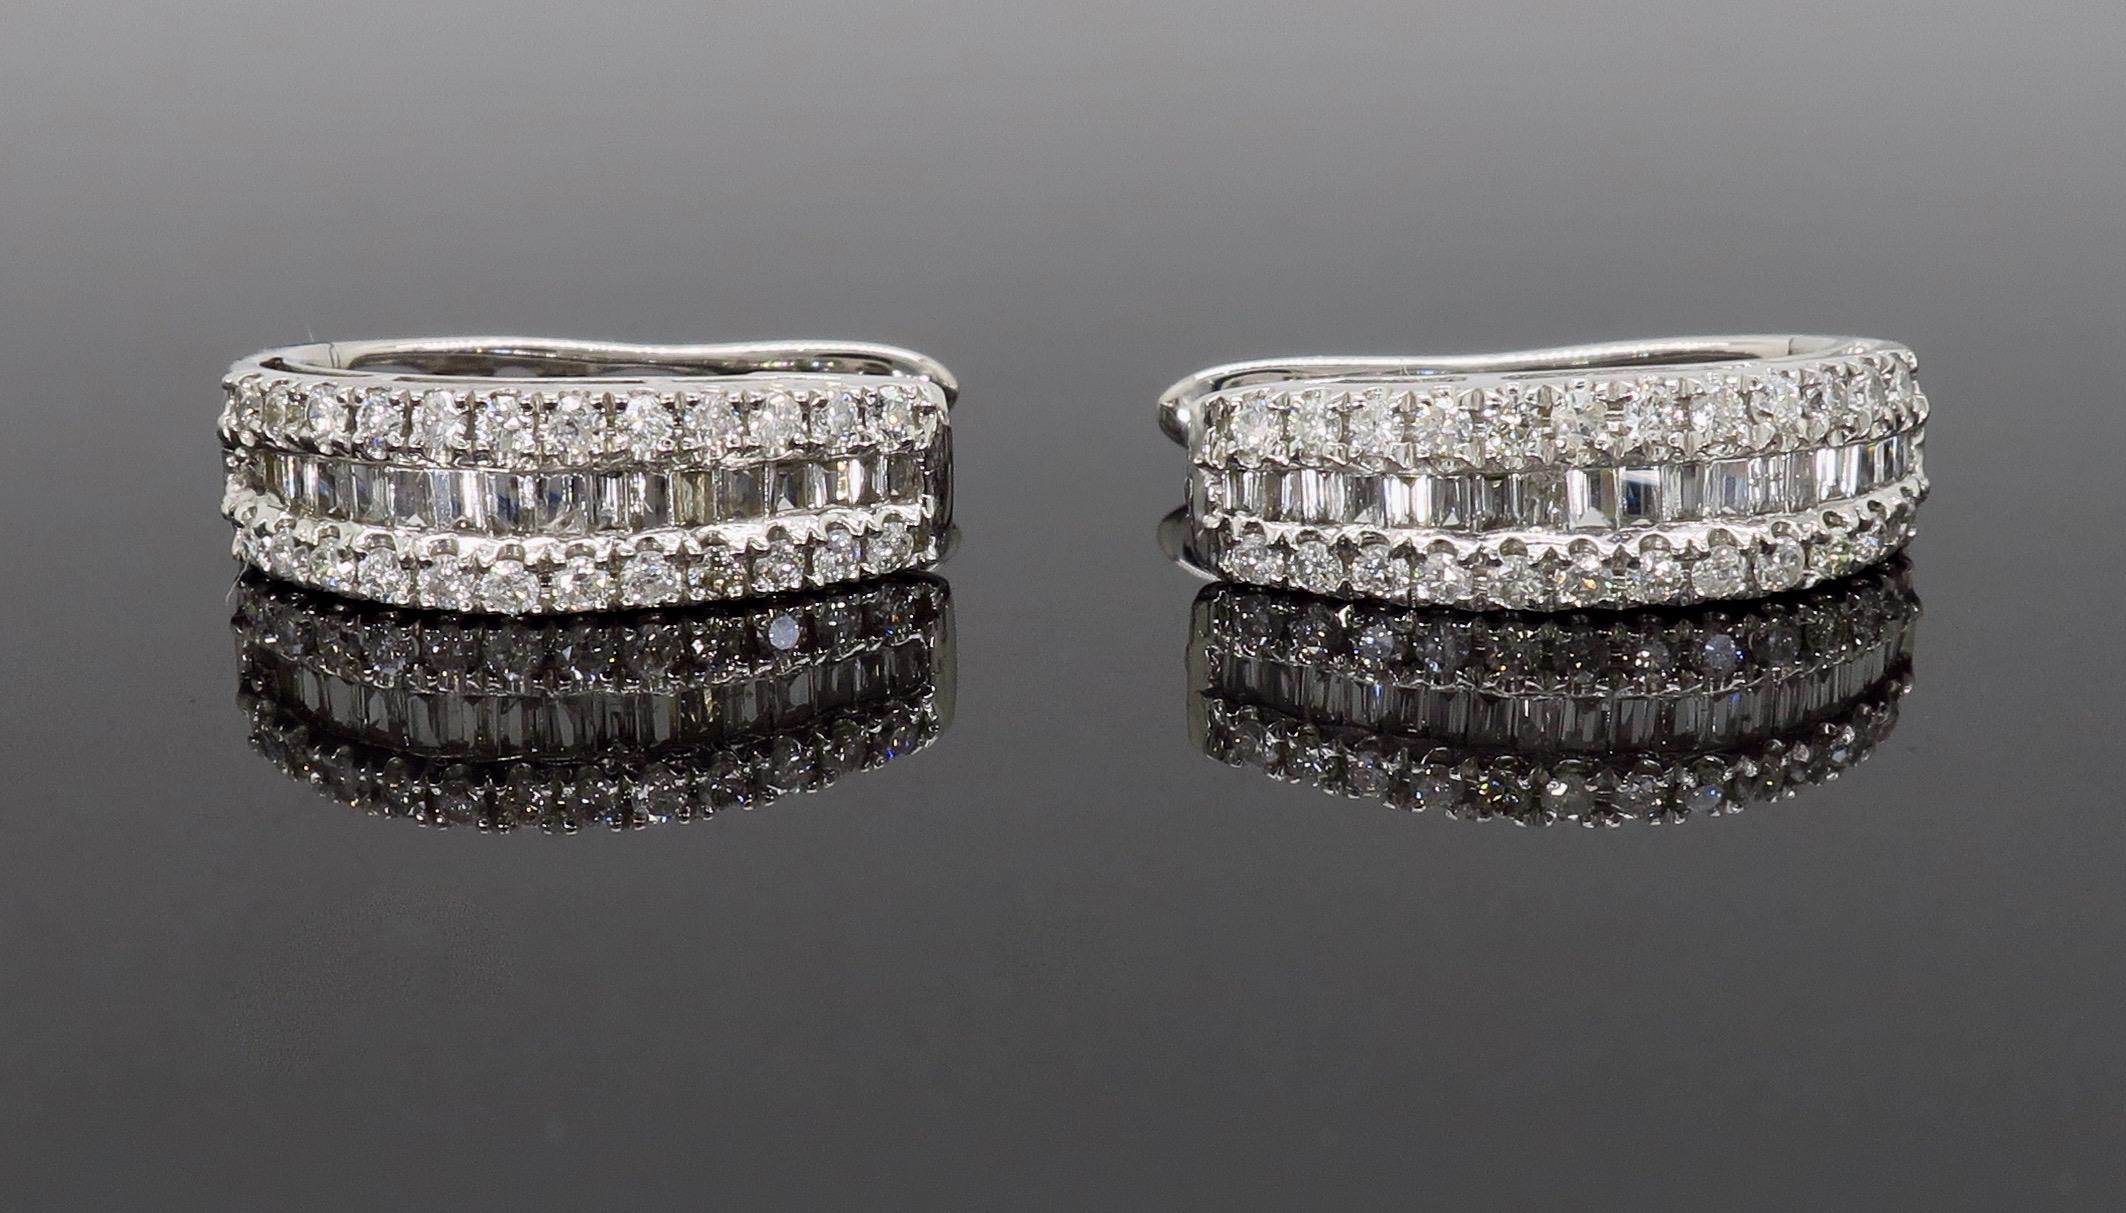 Mixed cut huggie style diamond earrings crafted in 18k white gold.

Diamond Cut: Baguette Cut and Round Brilliant Cut
Average Diamond Color: G-J
Average Diamond Clarity: VS-I
Diamond Carat Weight: Approximately .50CTW
Metal: 18K White